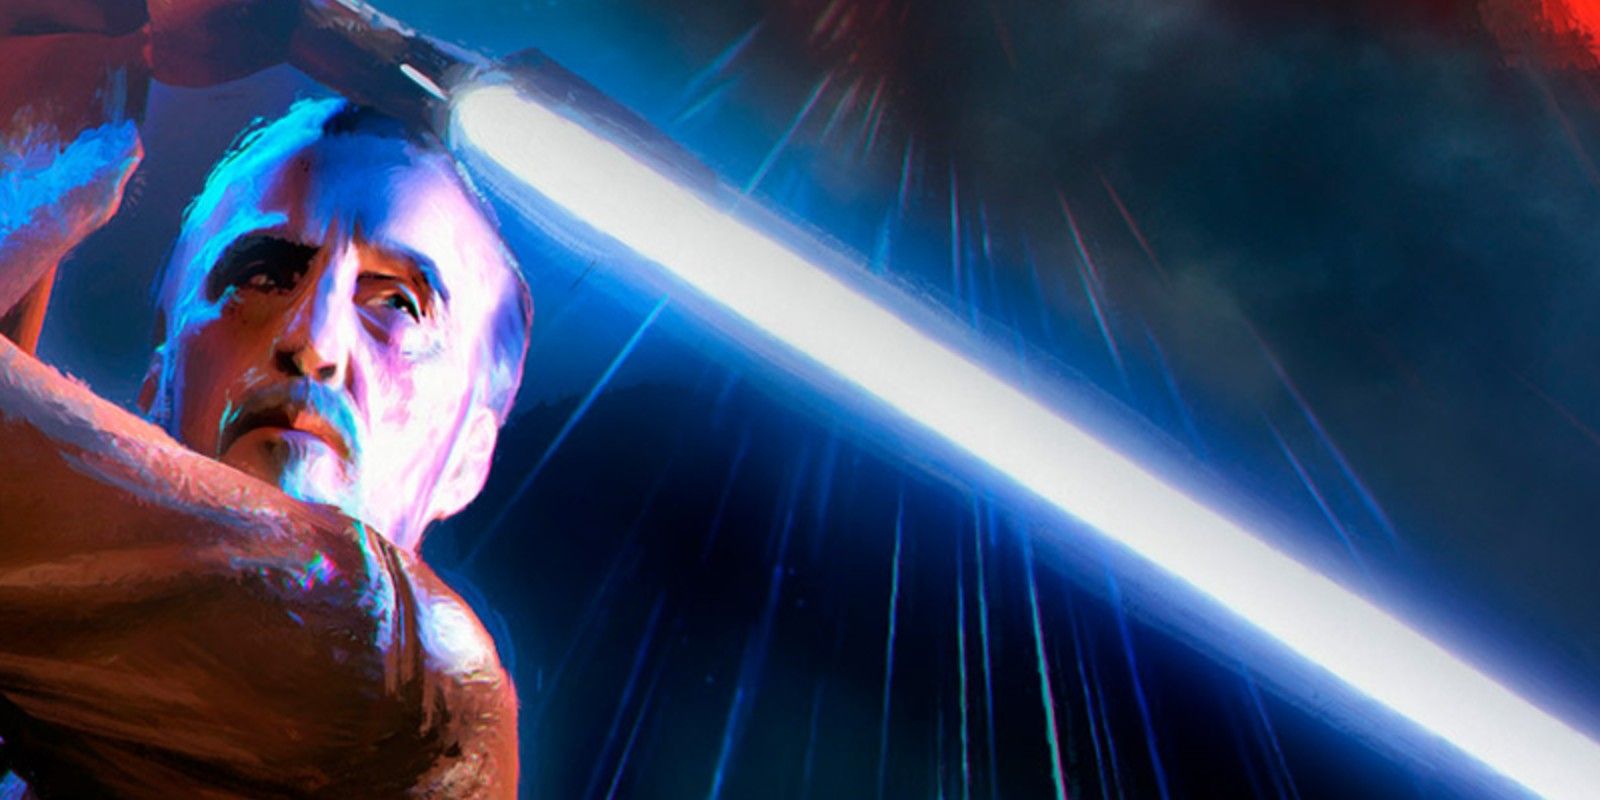 Count Dooku with a blue lightsaber on Jedi Lost Star Wars novel